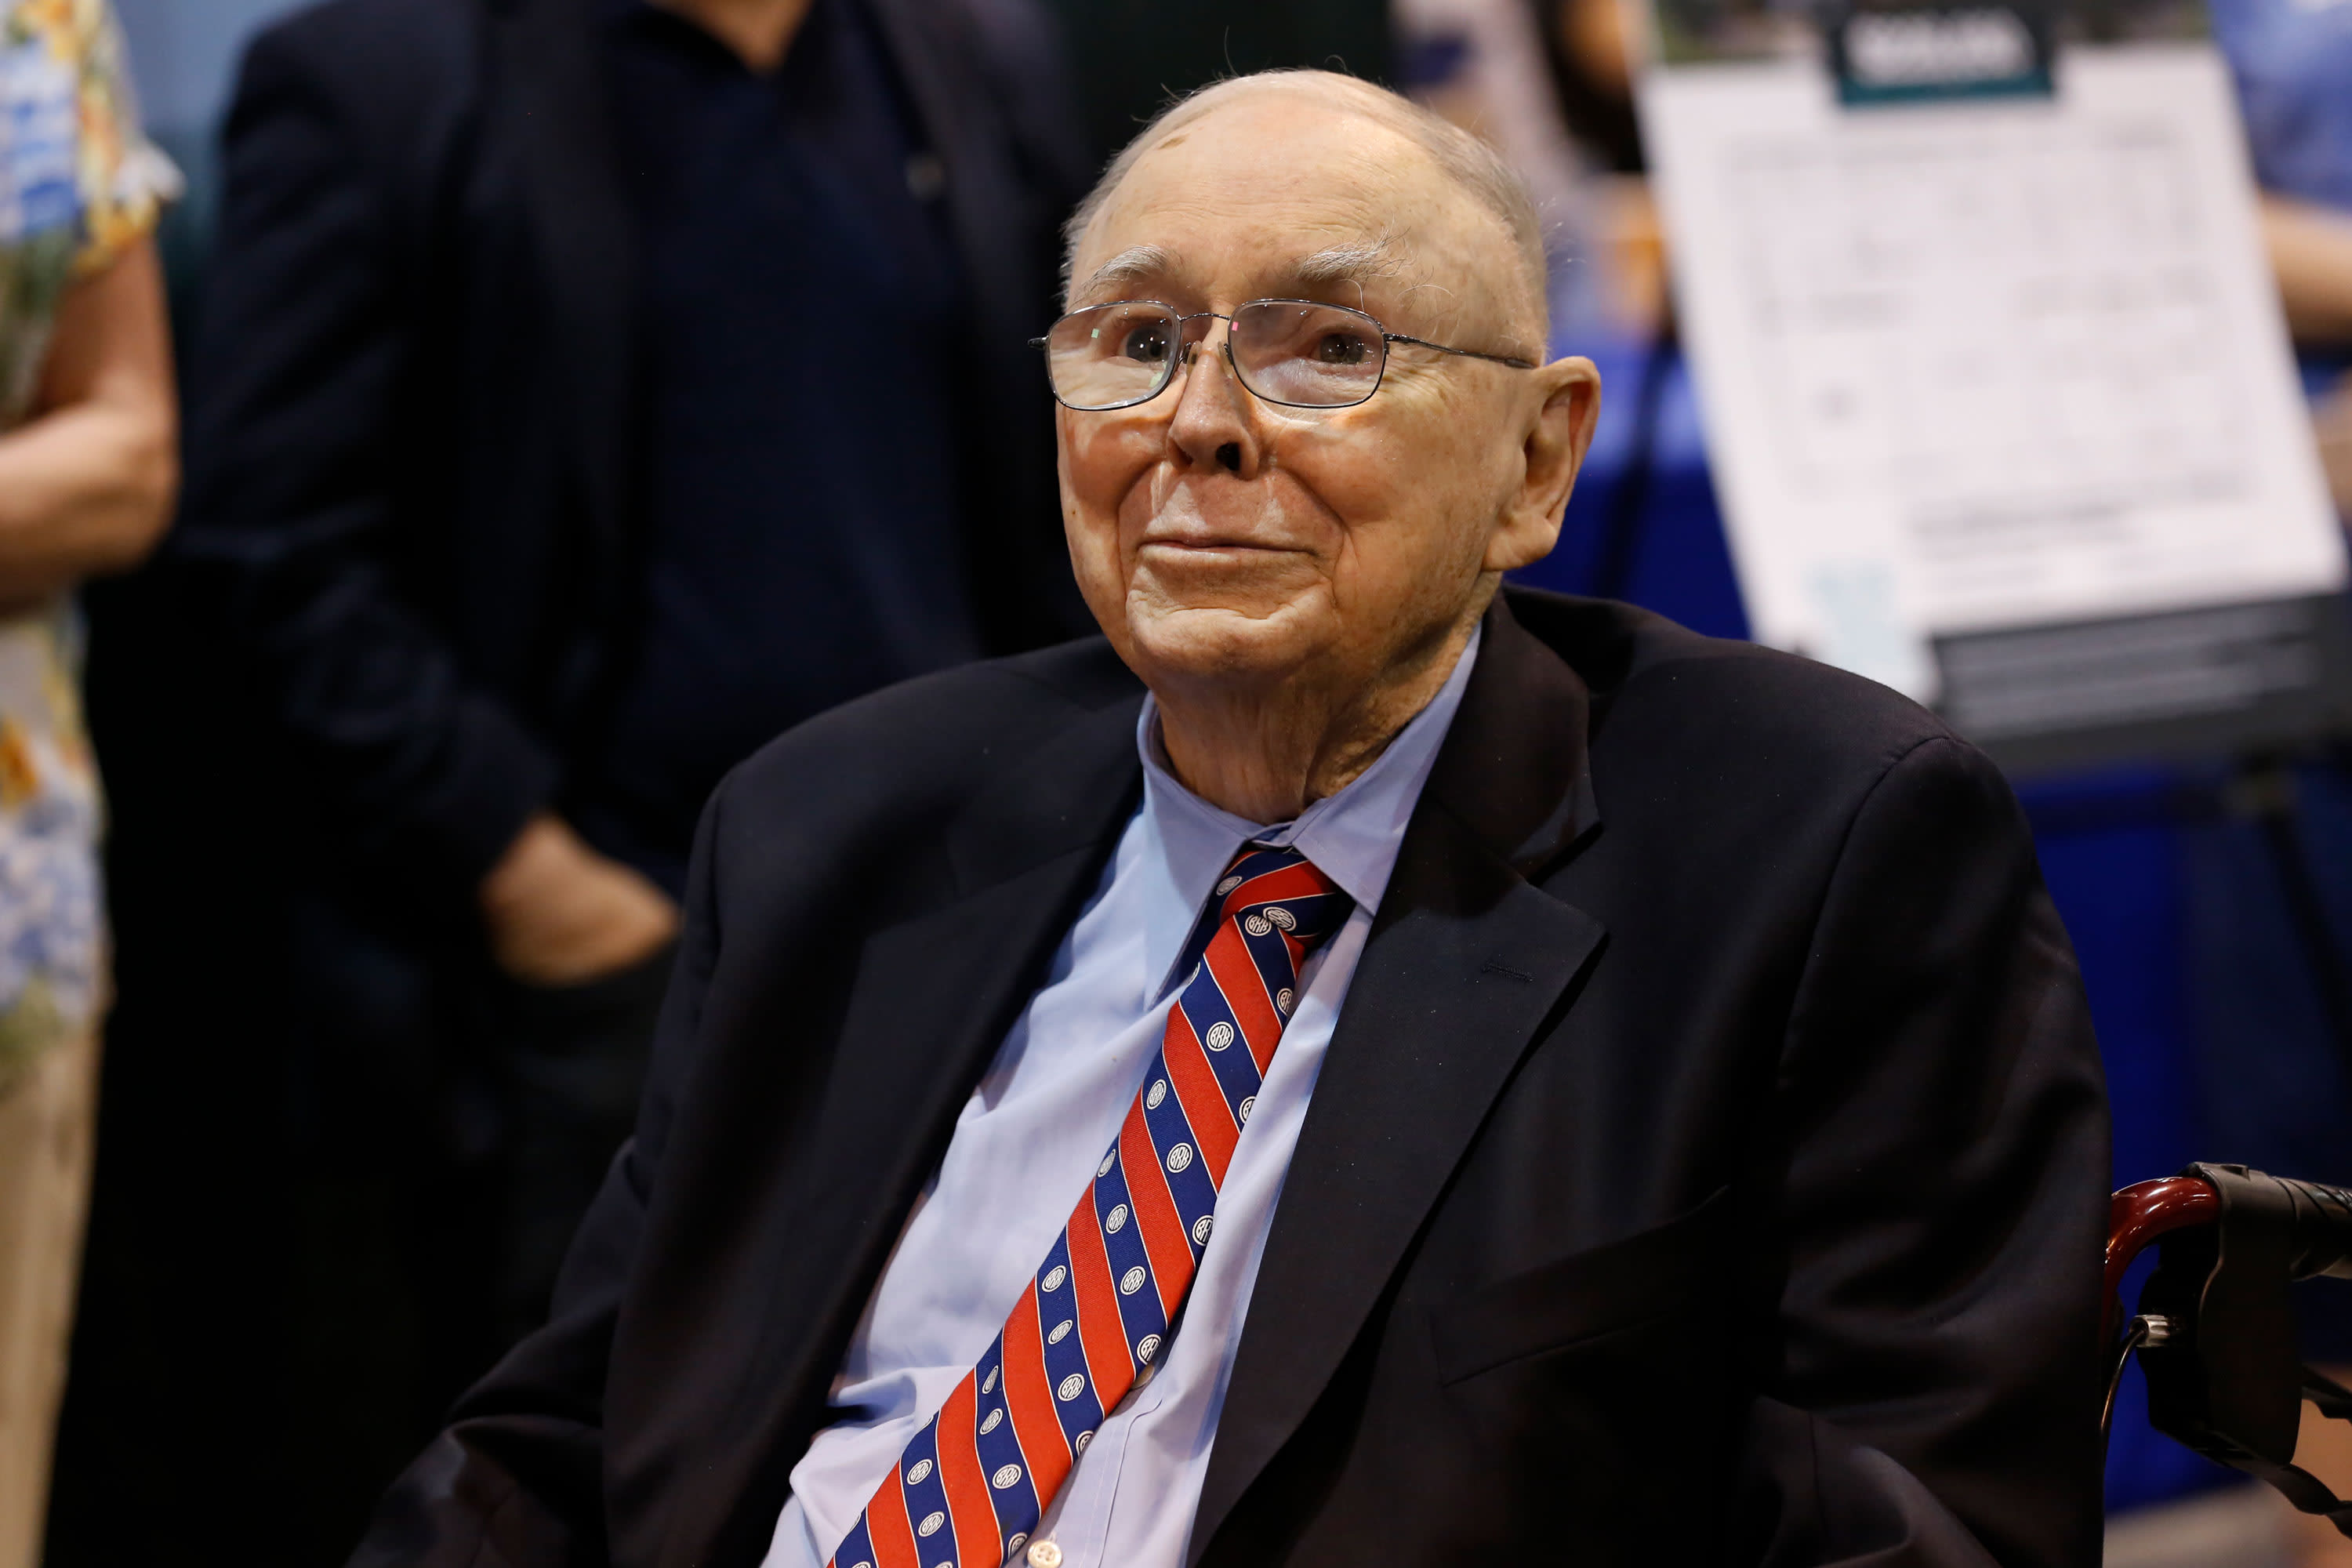 Charlie Munger - From Broke to a Billionaire